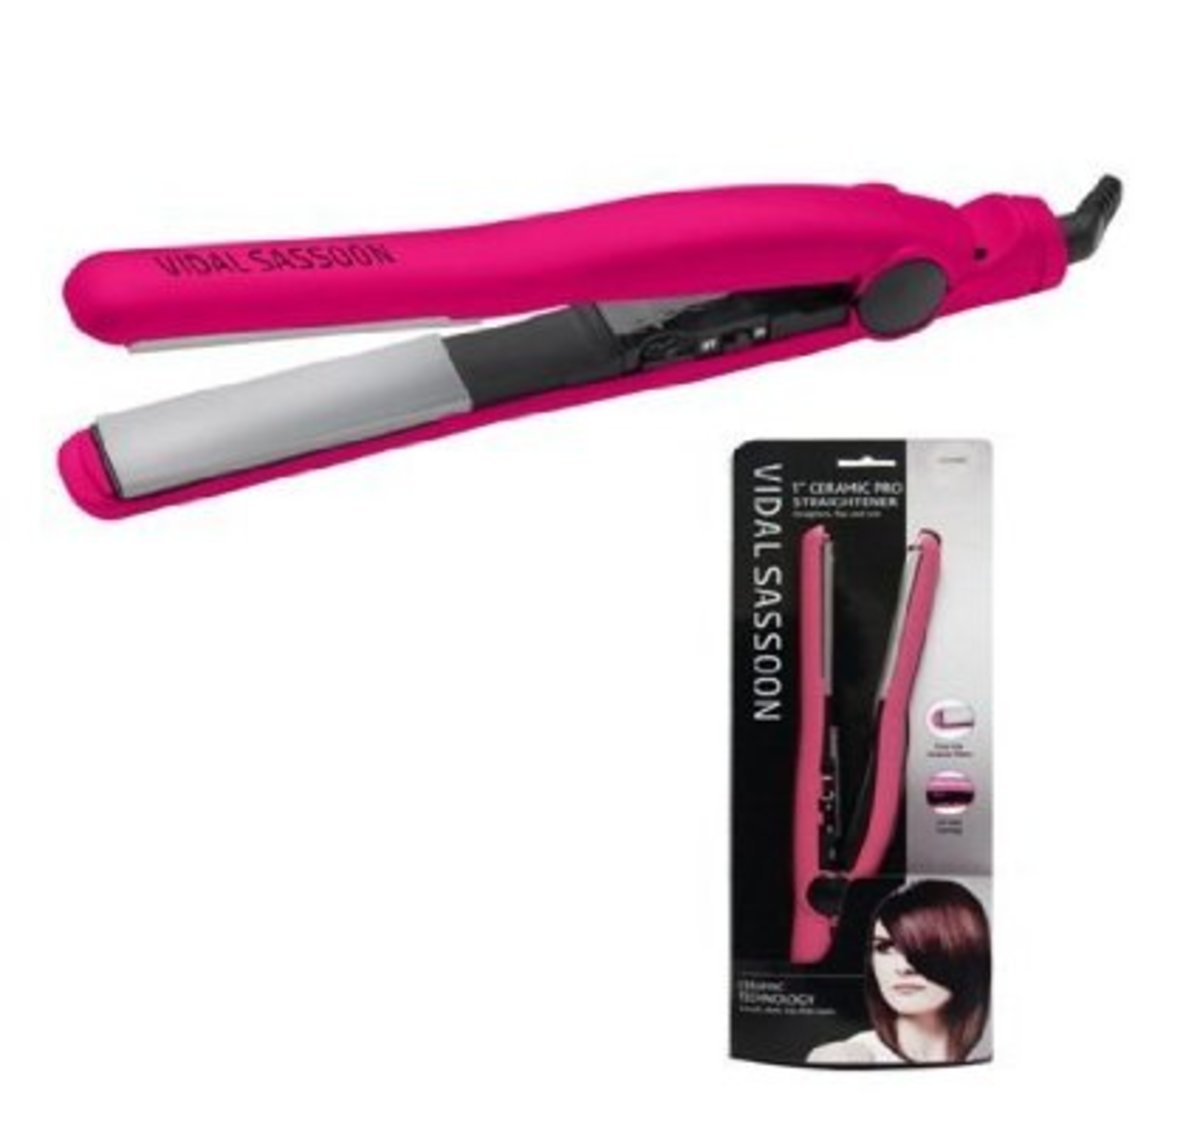 This Vidal Sassoon straightener works with any type of hair and has 25 different heat settings.  It takes just 30 seconds to heat up to a professional high heat of 395 degrees F (200 degrees C).